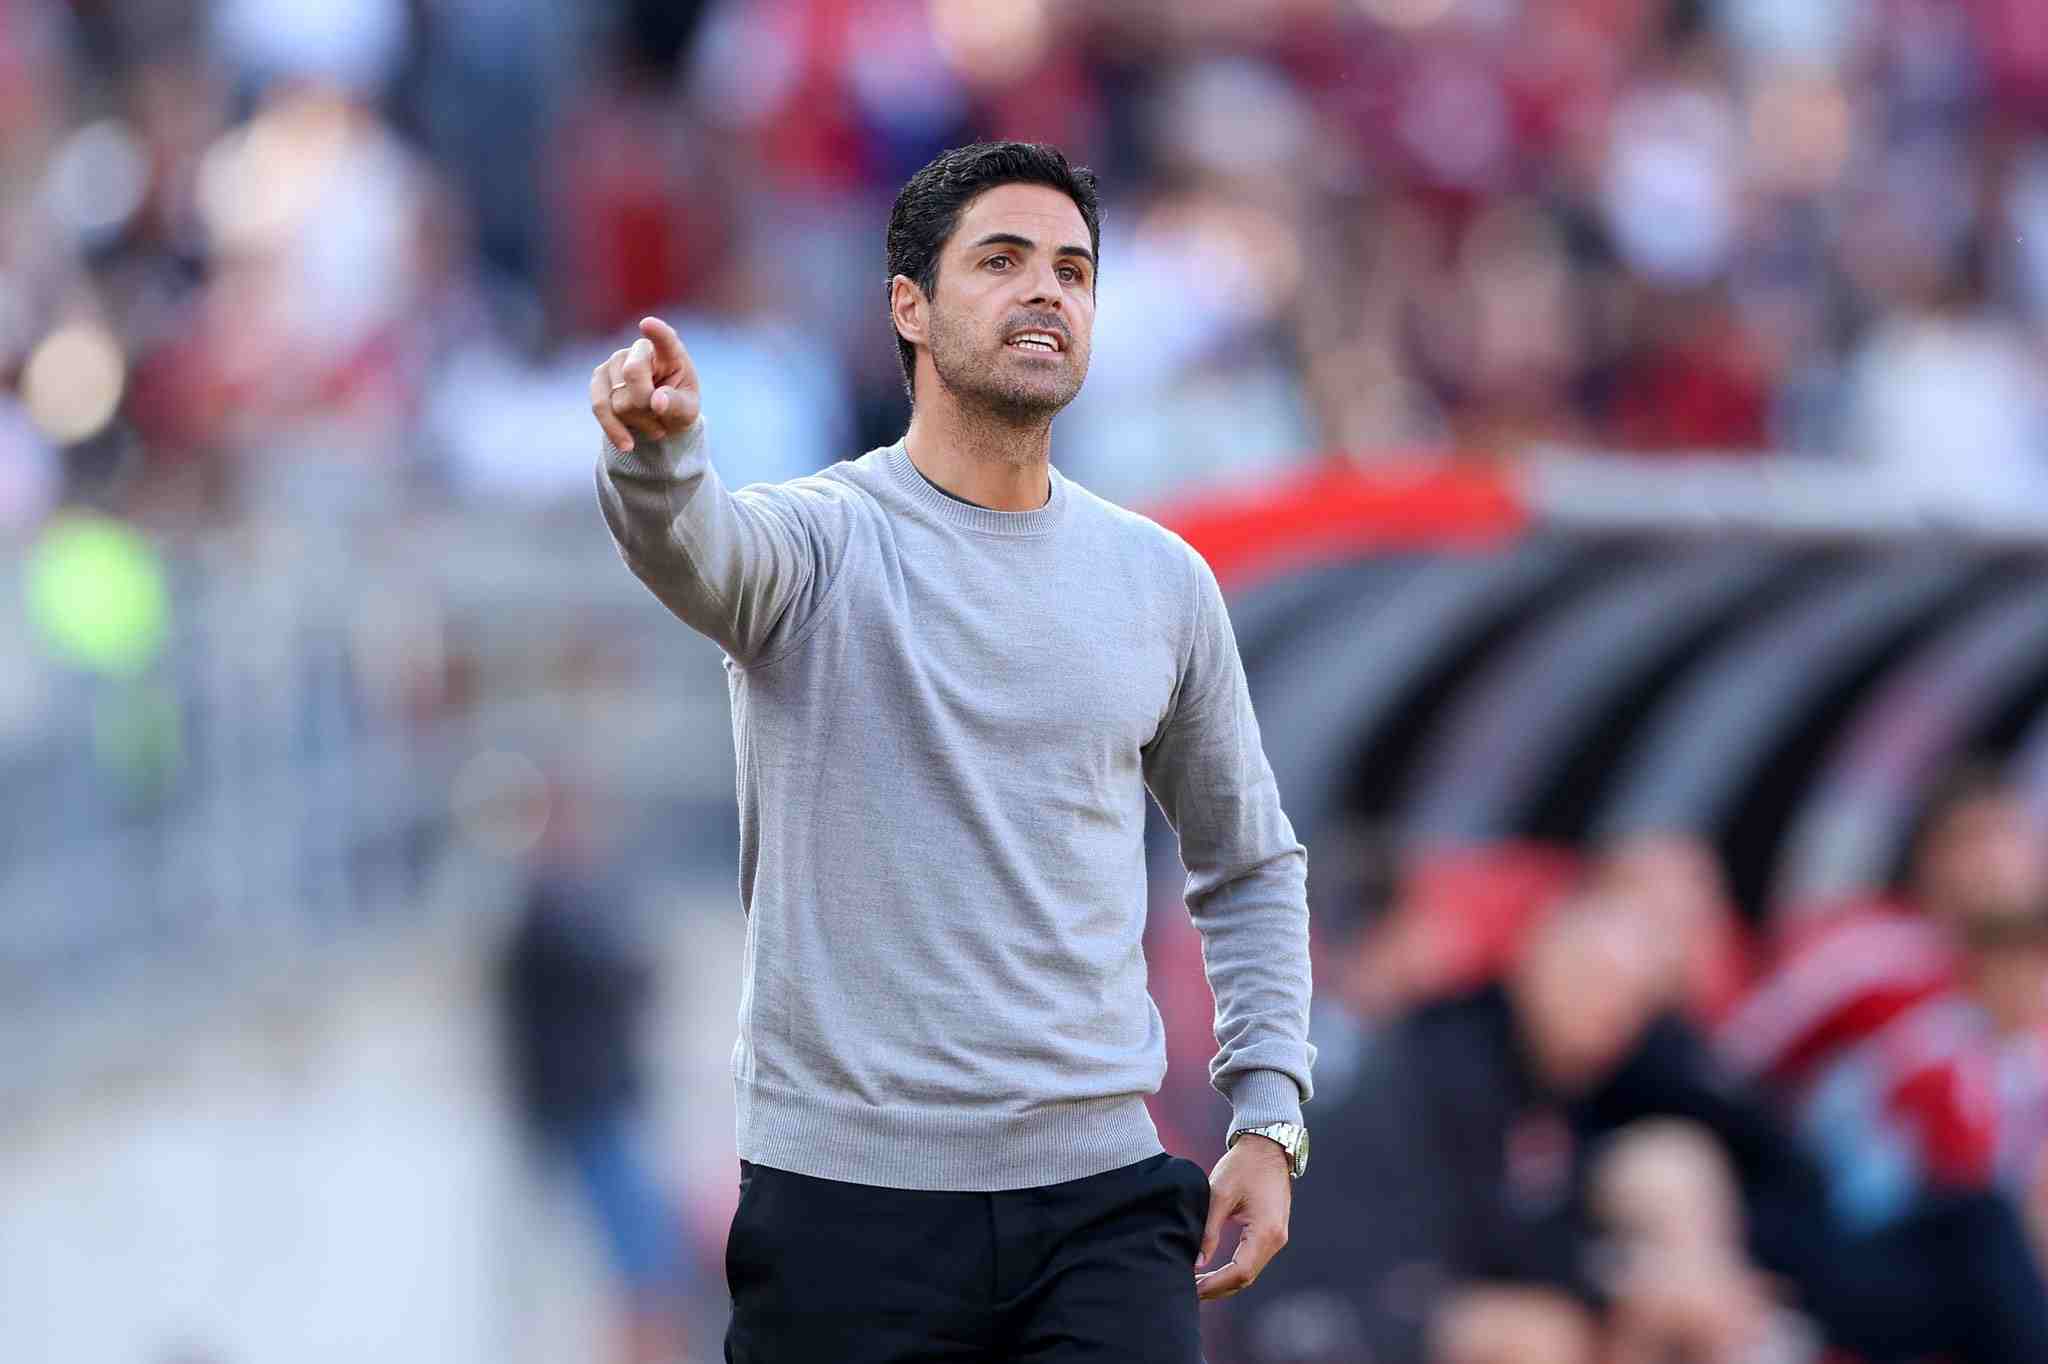 REVEALED: Arteta’s angry reaction after Arsenal failed to qualify for Champions League